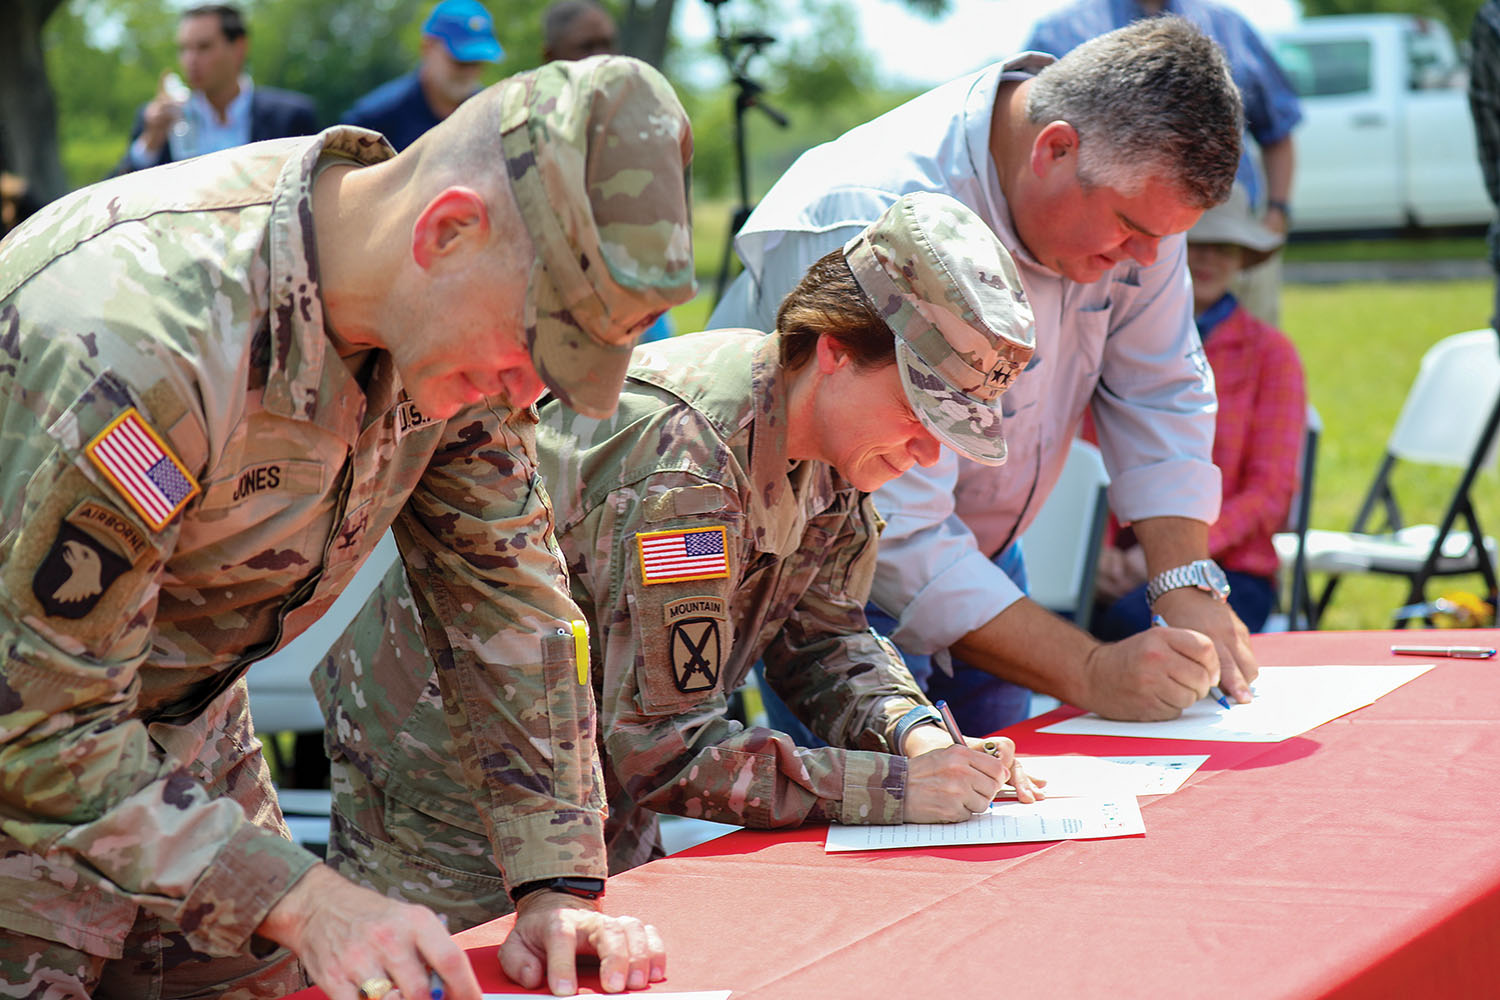 From left, Col. Cullen Jones, Maj. Gen. Diana Holland, and Ben Haase sign partnership agreement. (Photo courtesy of Corps of Engineers)